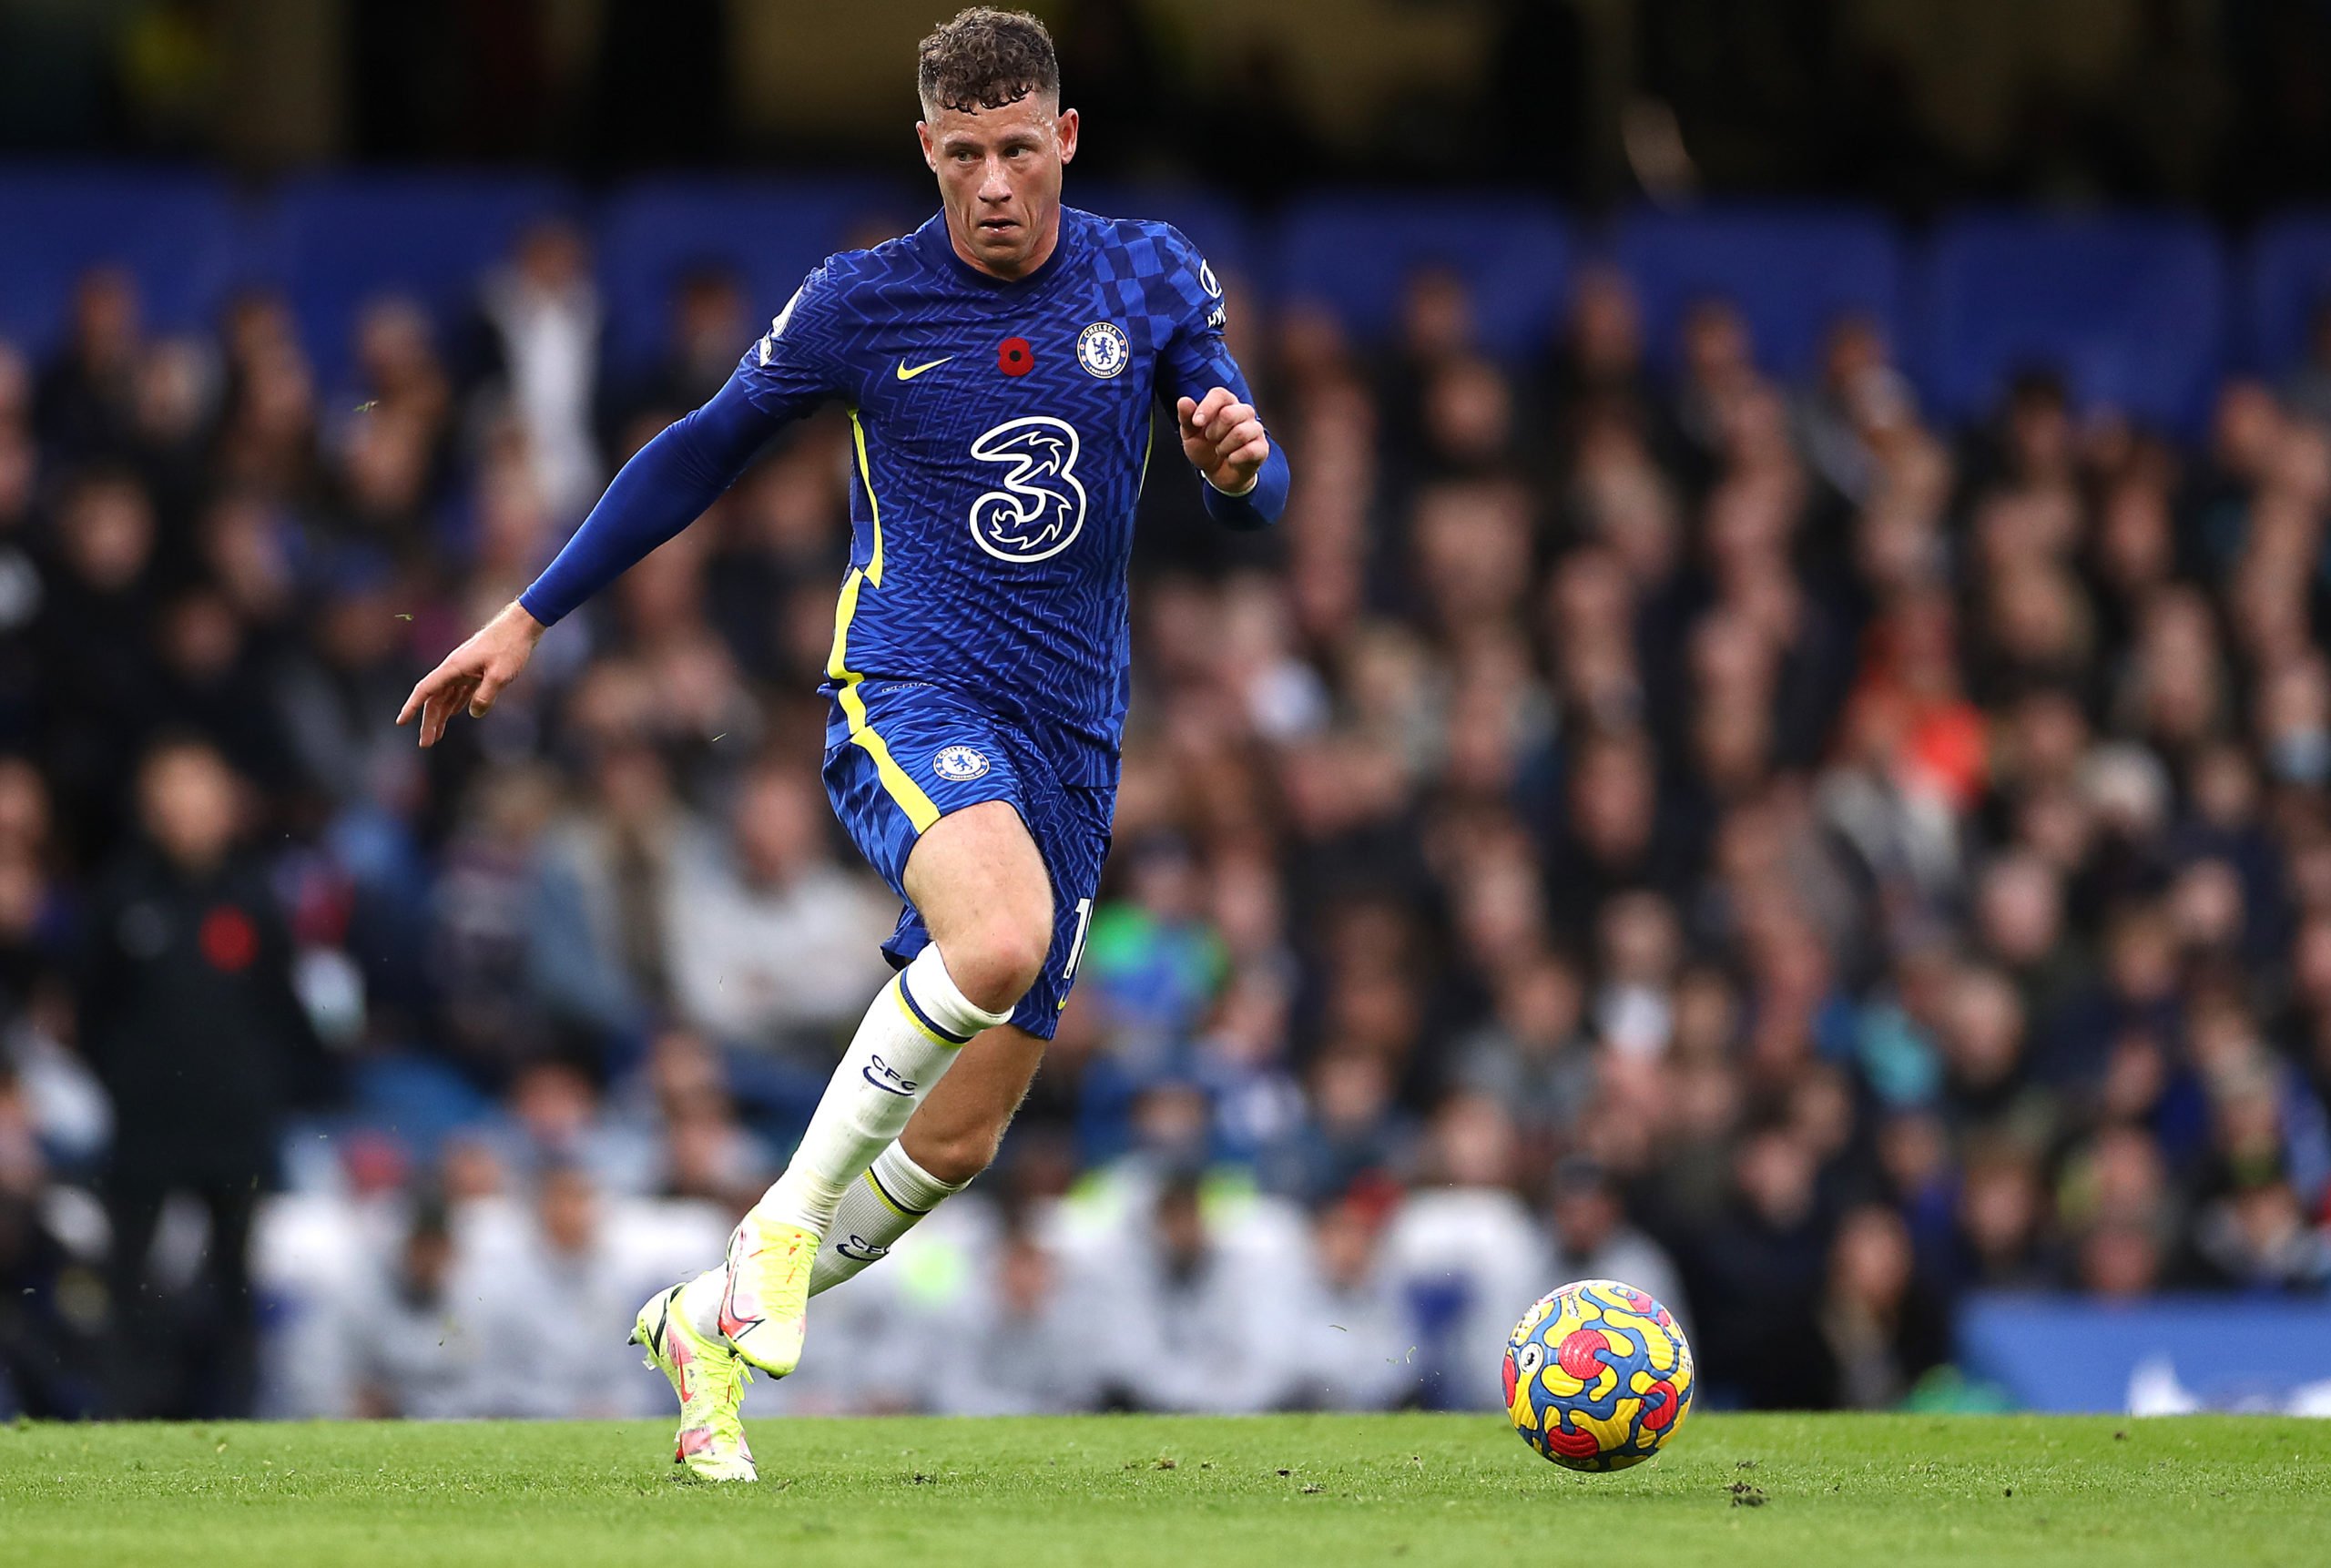 LONDON, ENGLAND - NOVEMBER 06: Ross Barkley of Chelsea controls the ball  during the Premier League match between Chelsea and Burnley at Stamford Bridge on November 06, 2021 in London, England. (Photo by Ryan Pierse/Getty Images)The 4th Official uses images provided by the following image agency: Getty Images (https://www.gettyimages.de/) Imago Images (https://www.imago-images.de/)